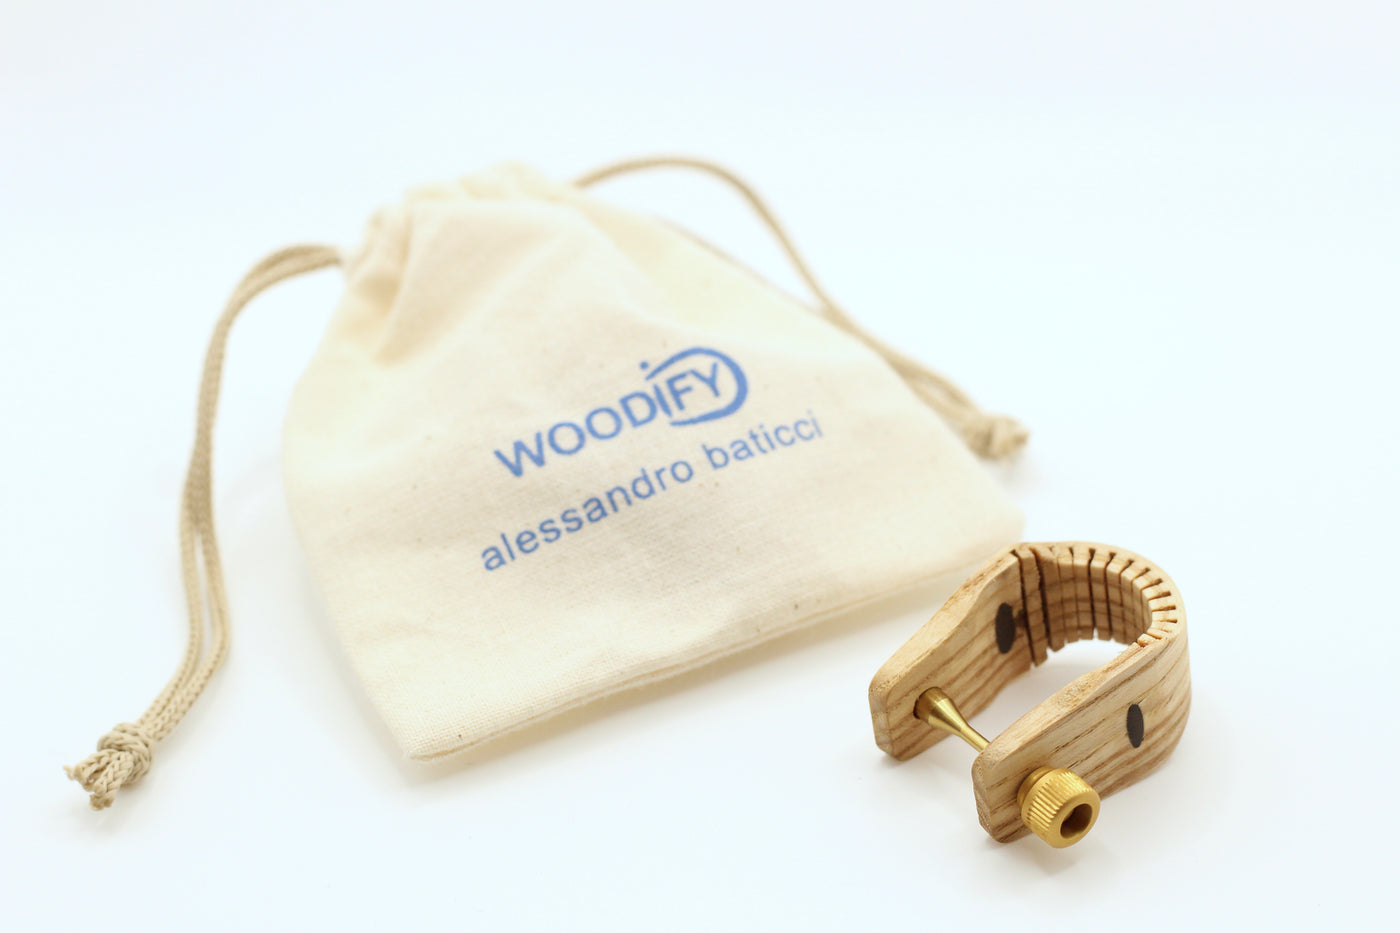 WOODIFY℗ Sound Ring for Flute - Insert